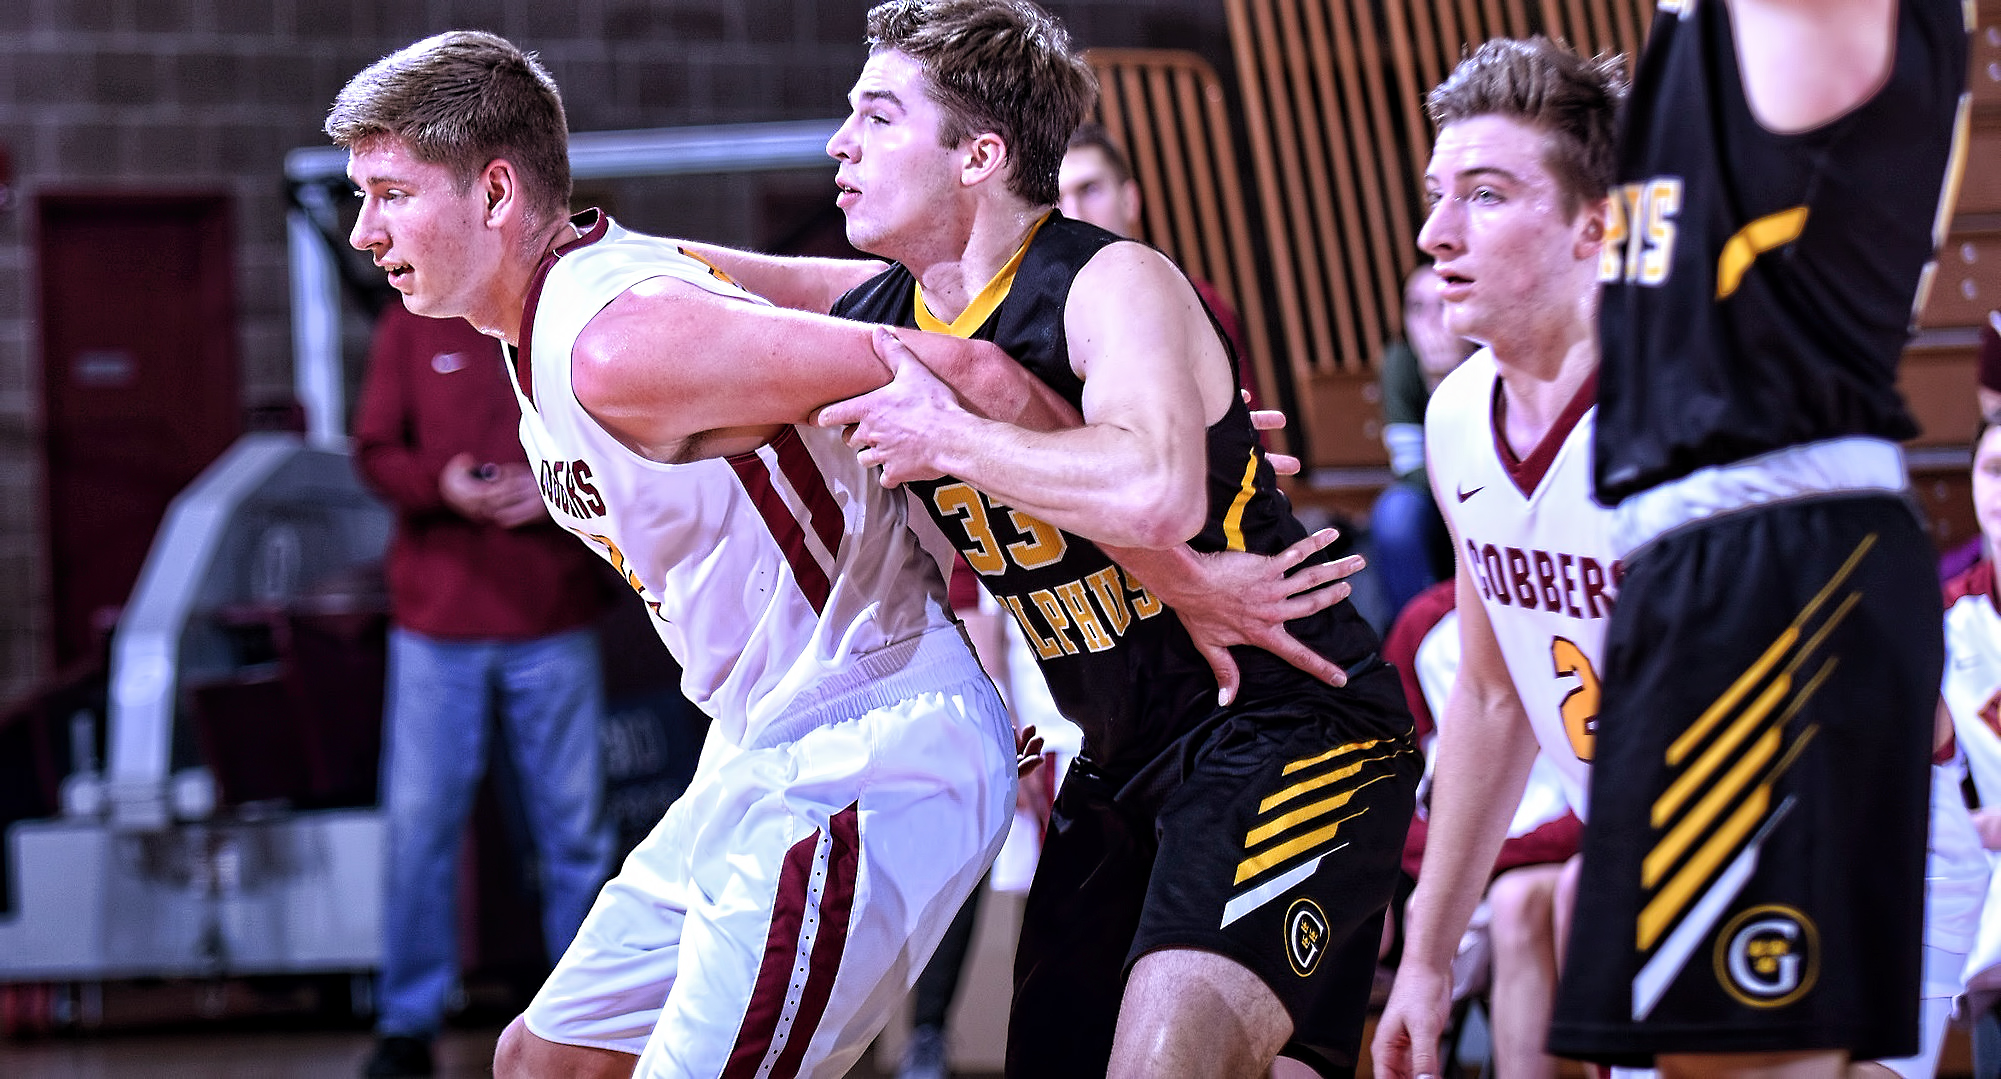 John Reiten (L) had 12 points and Bryden Urie added 18 in the Cobbers' game at Gustavus.